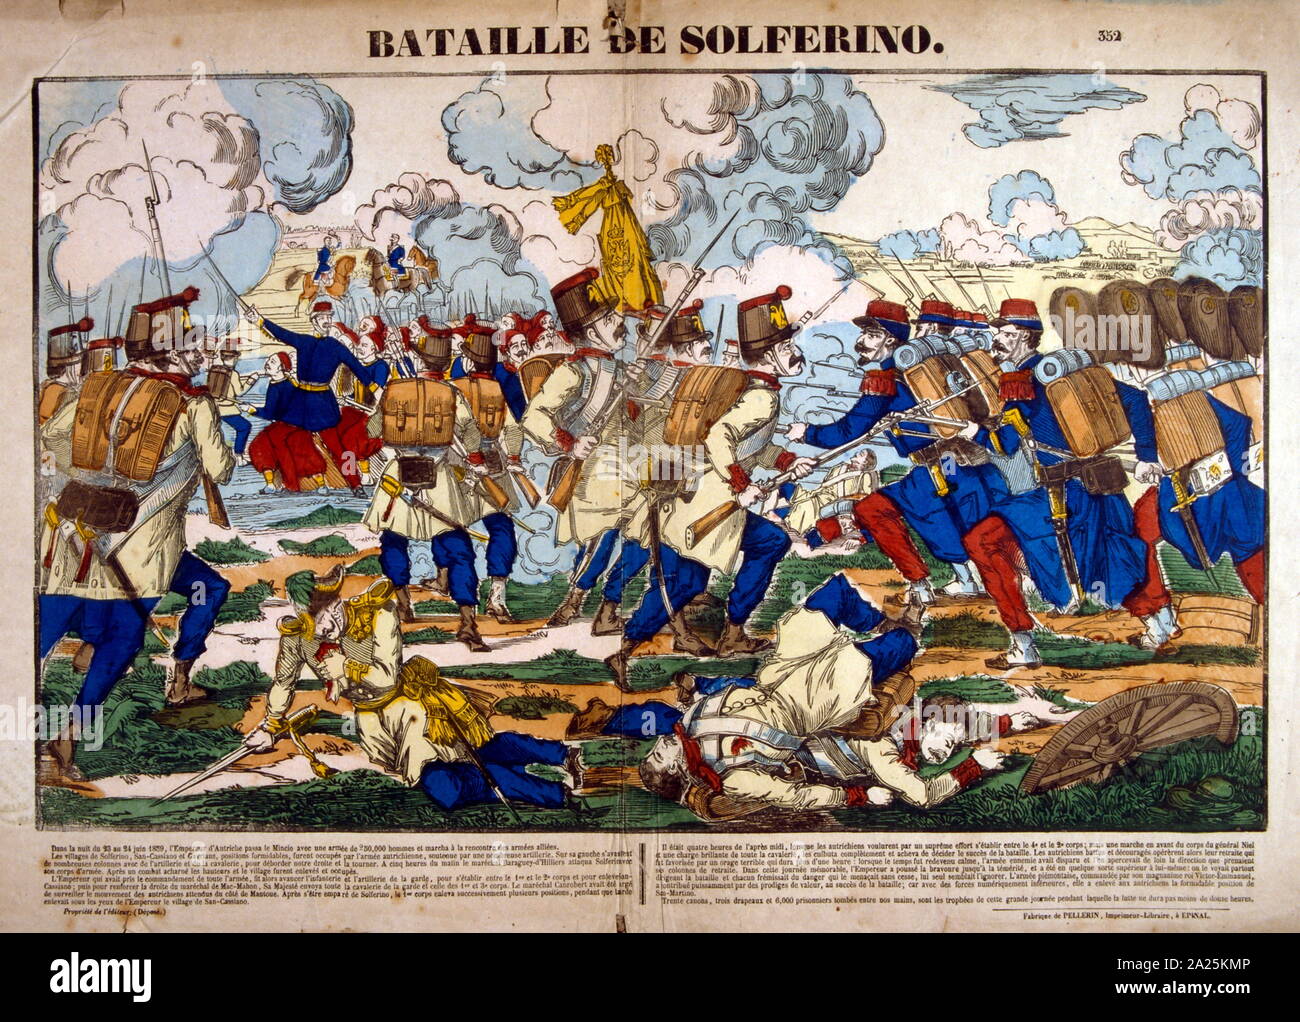 French illustration of the Battle of Solferino (referred to in Italy as the Battle of Solferino and San Martino) on 24 June 1859 resulted in the victory of the allied French Army under Napoleon III and Sardinian Army under Victor Emmanuel II (together known as the Franco-Sardinian Alliance) against the Austrian Army under Emperor Franz Joseph I. It was the last major battle in world history where all the armies were under the personal command of their monarchs. Stock Photo